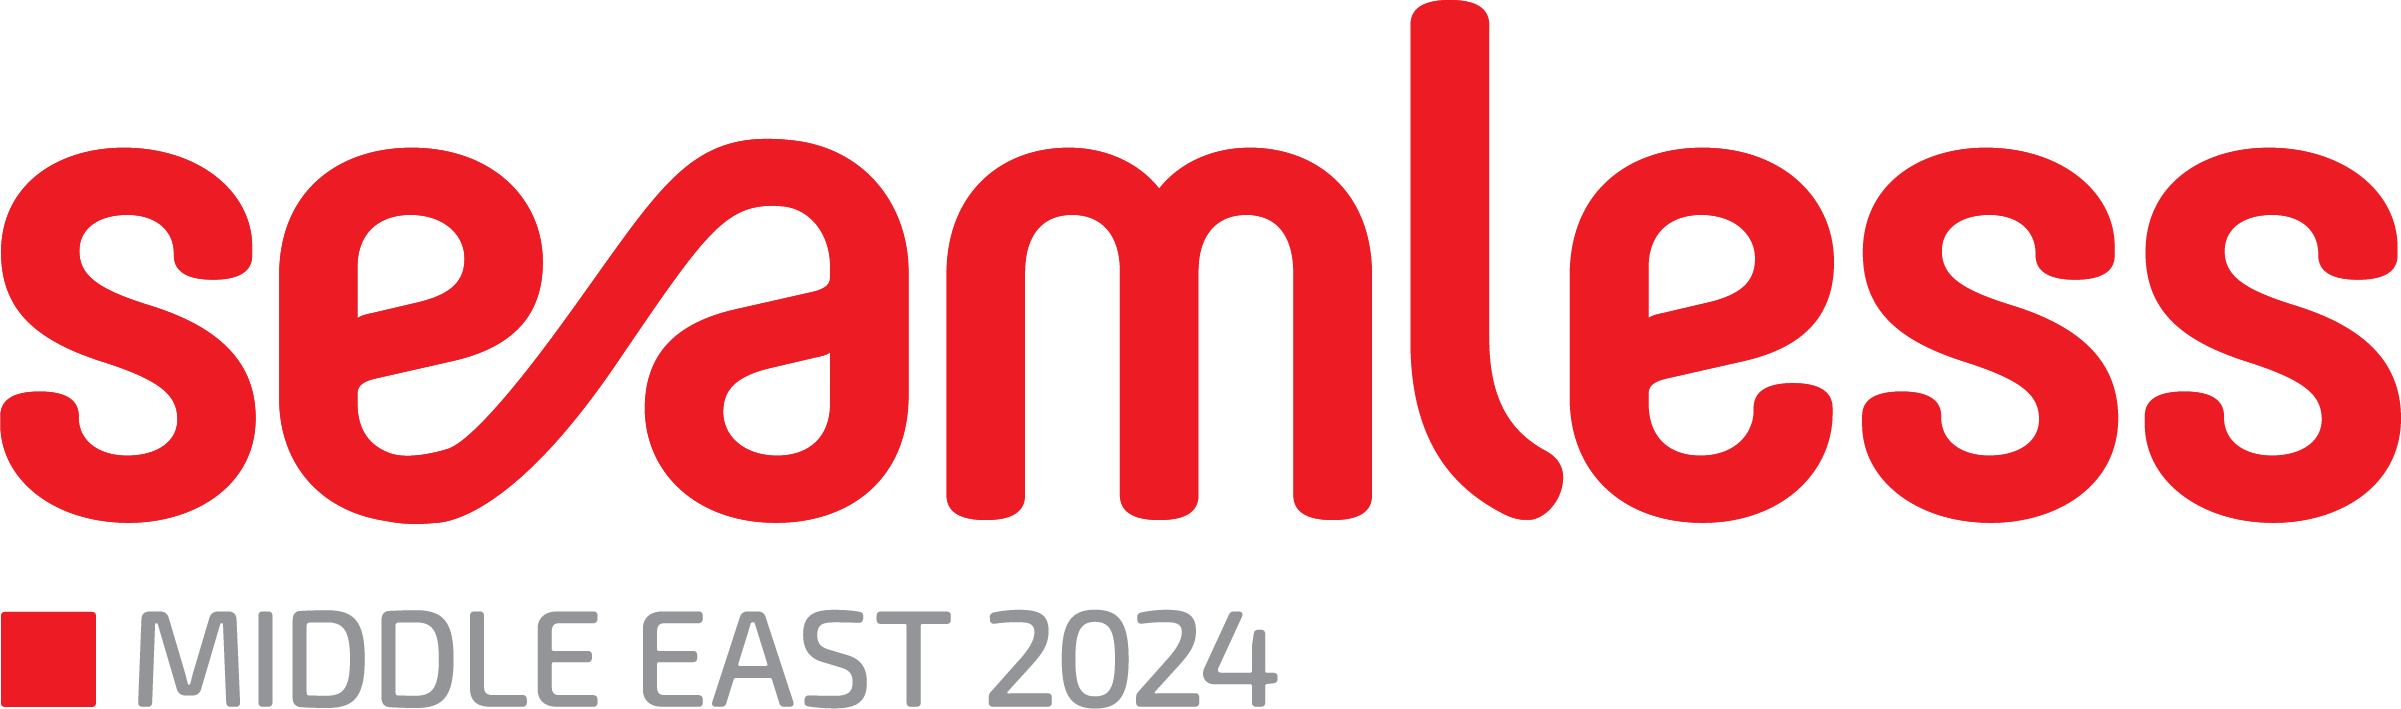 Seamless Middle East 2024 Logo